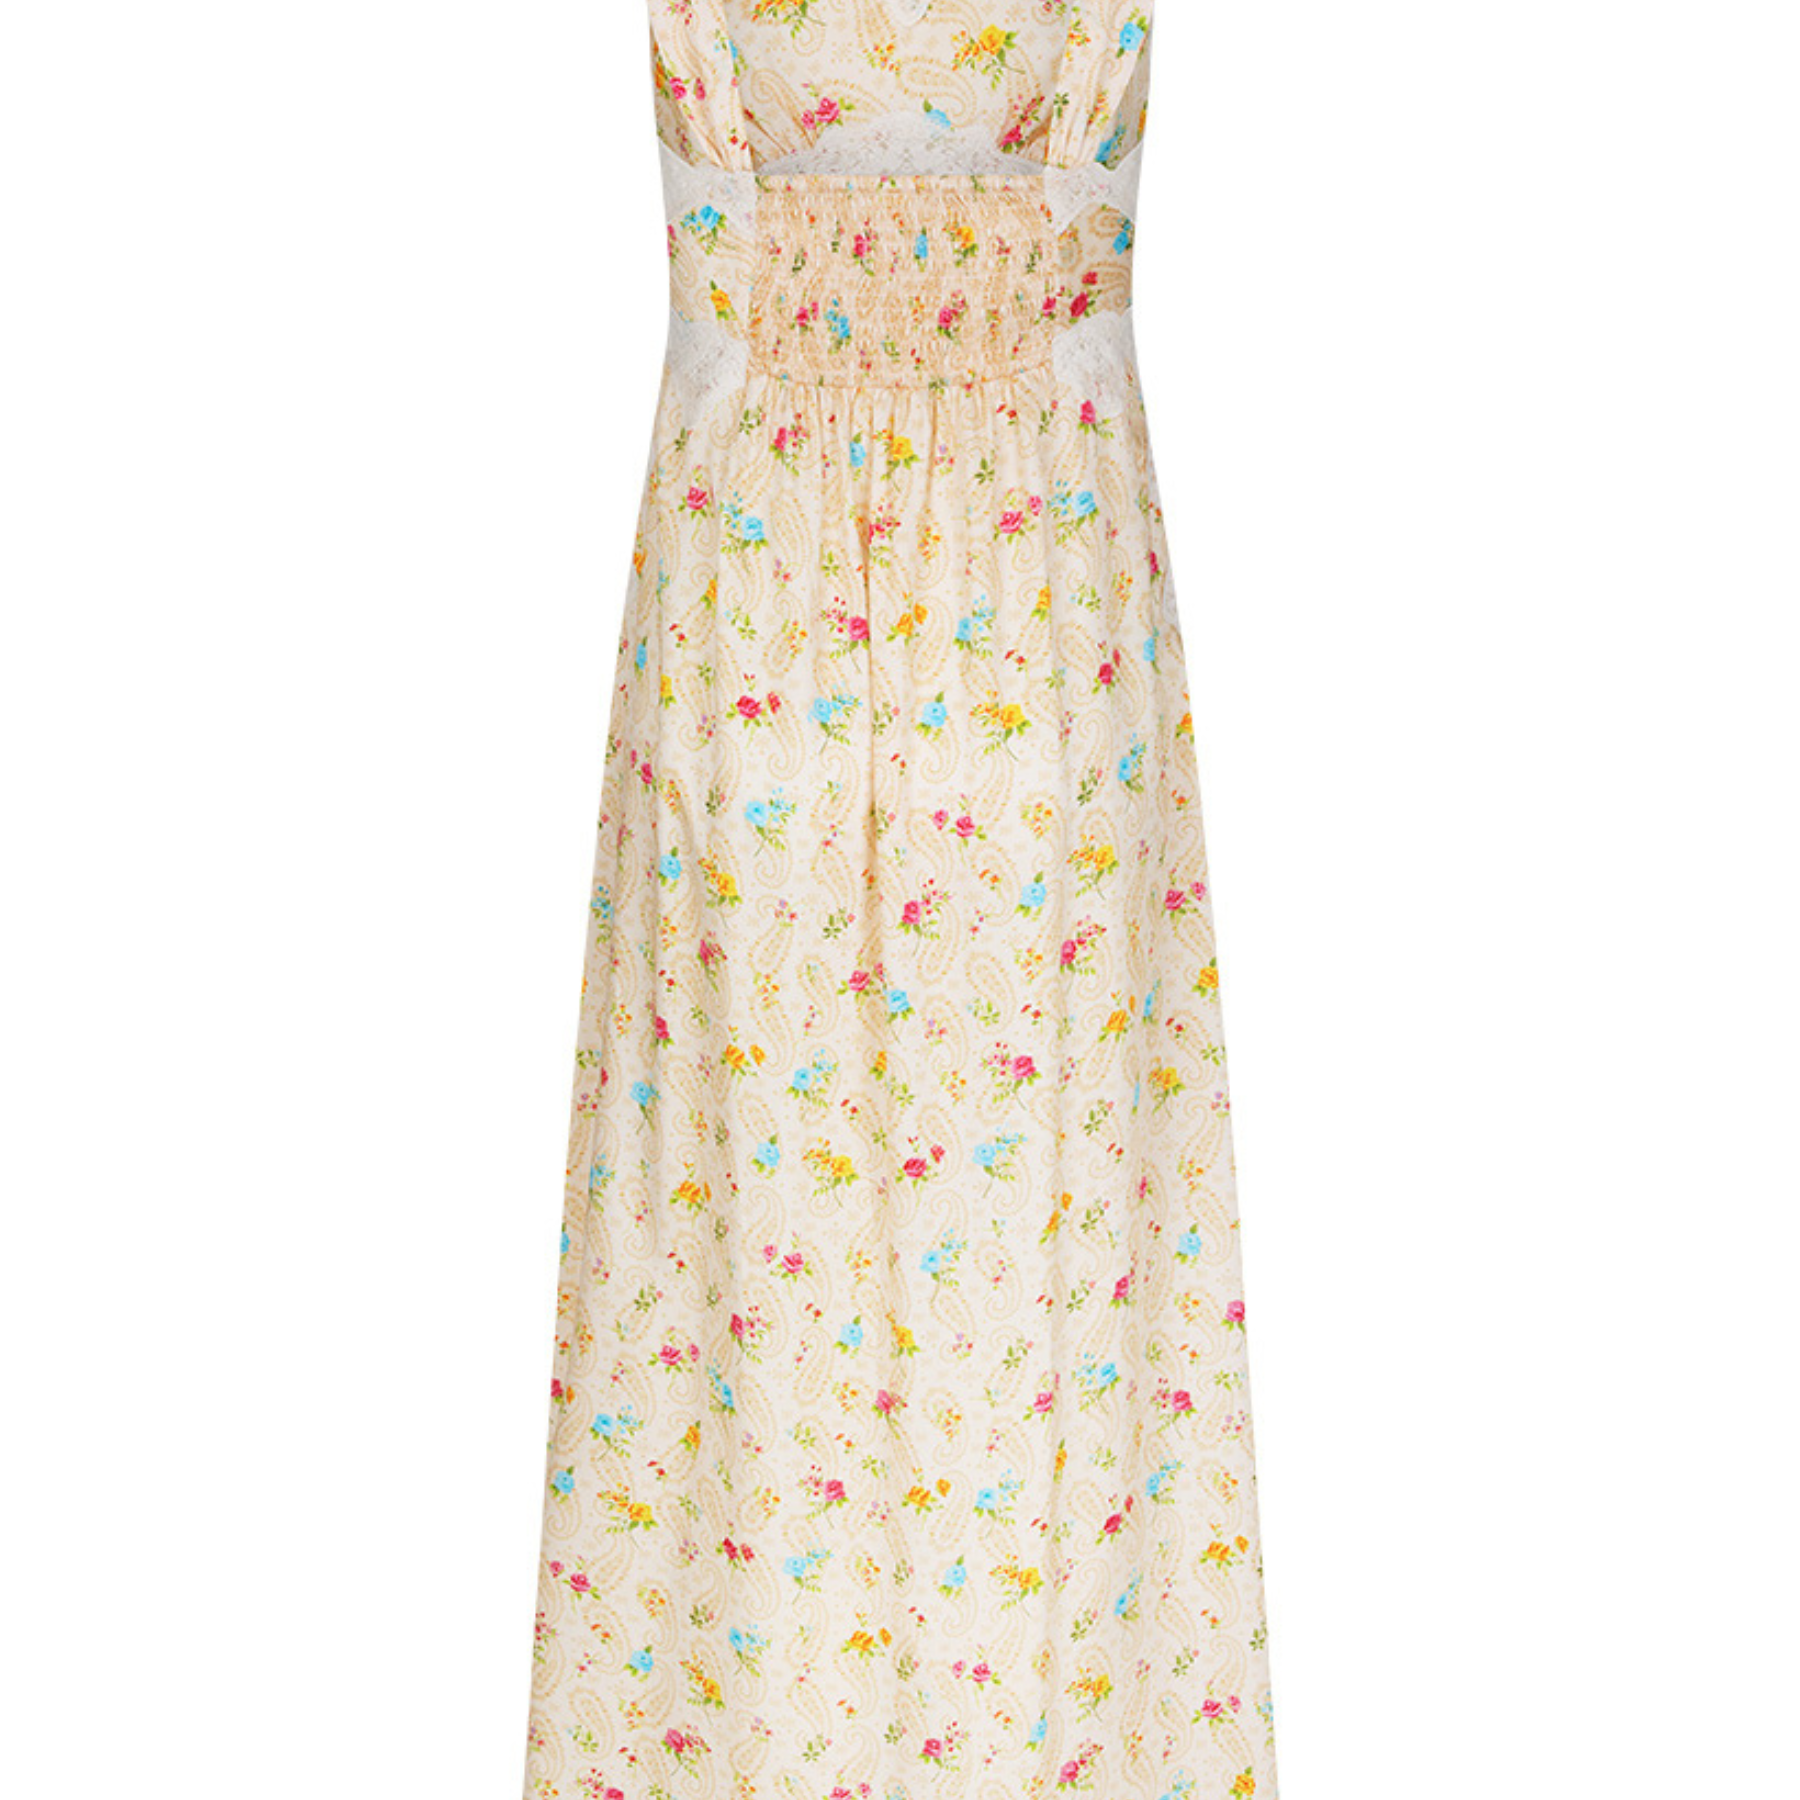 Spell Fleur slip dress in ditzy floral with lace trims